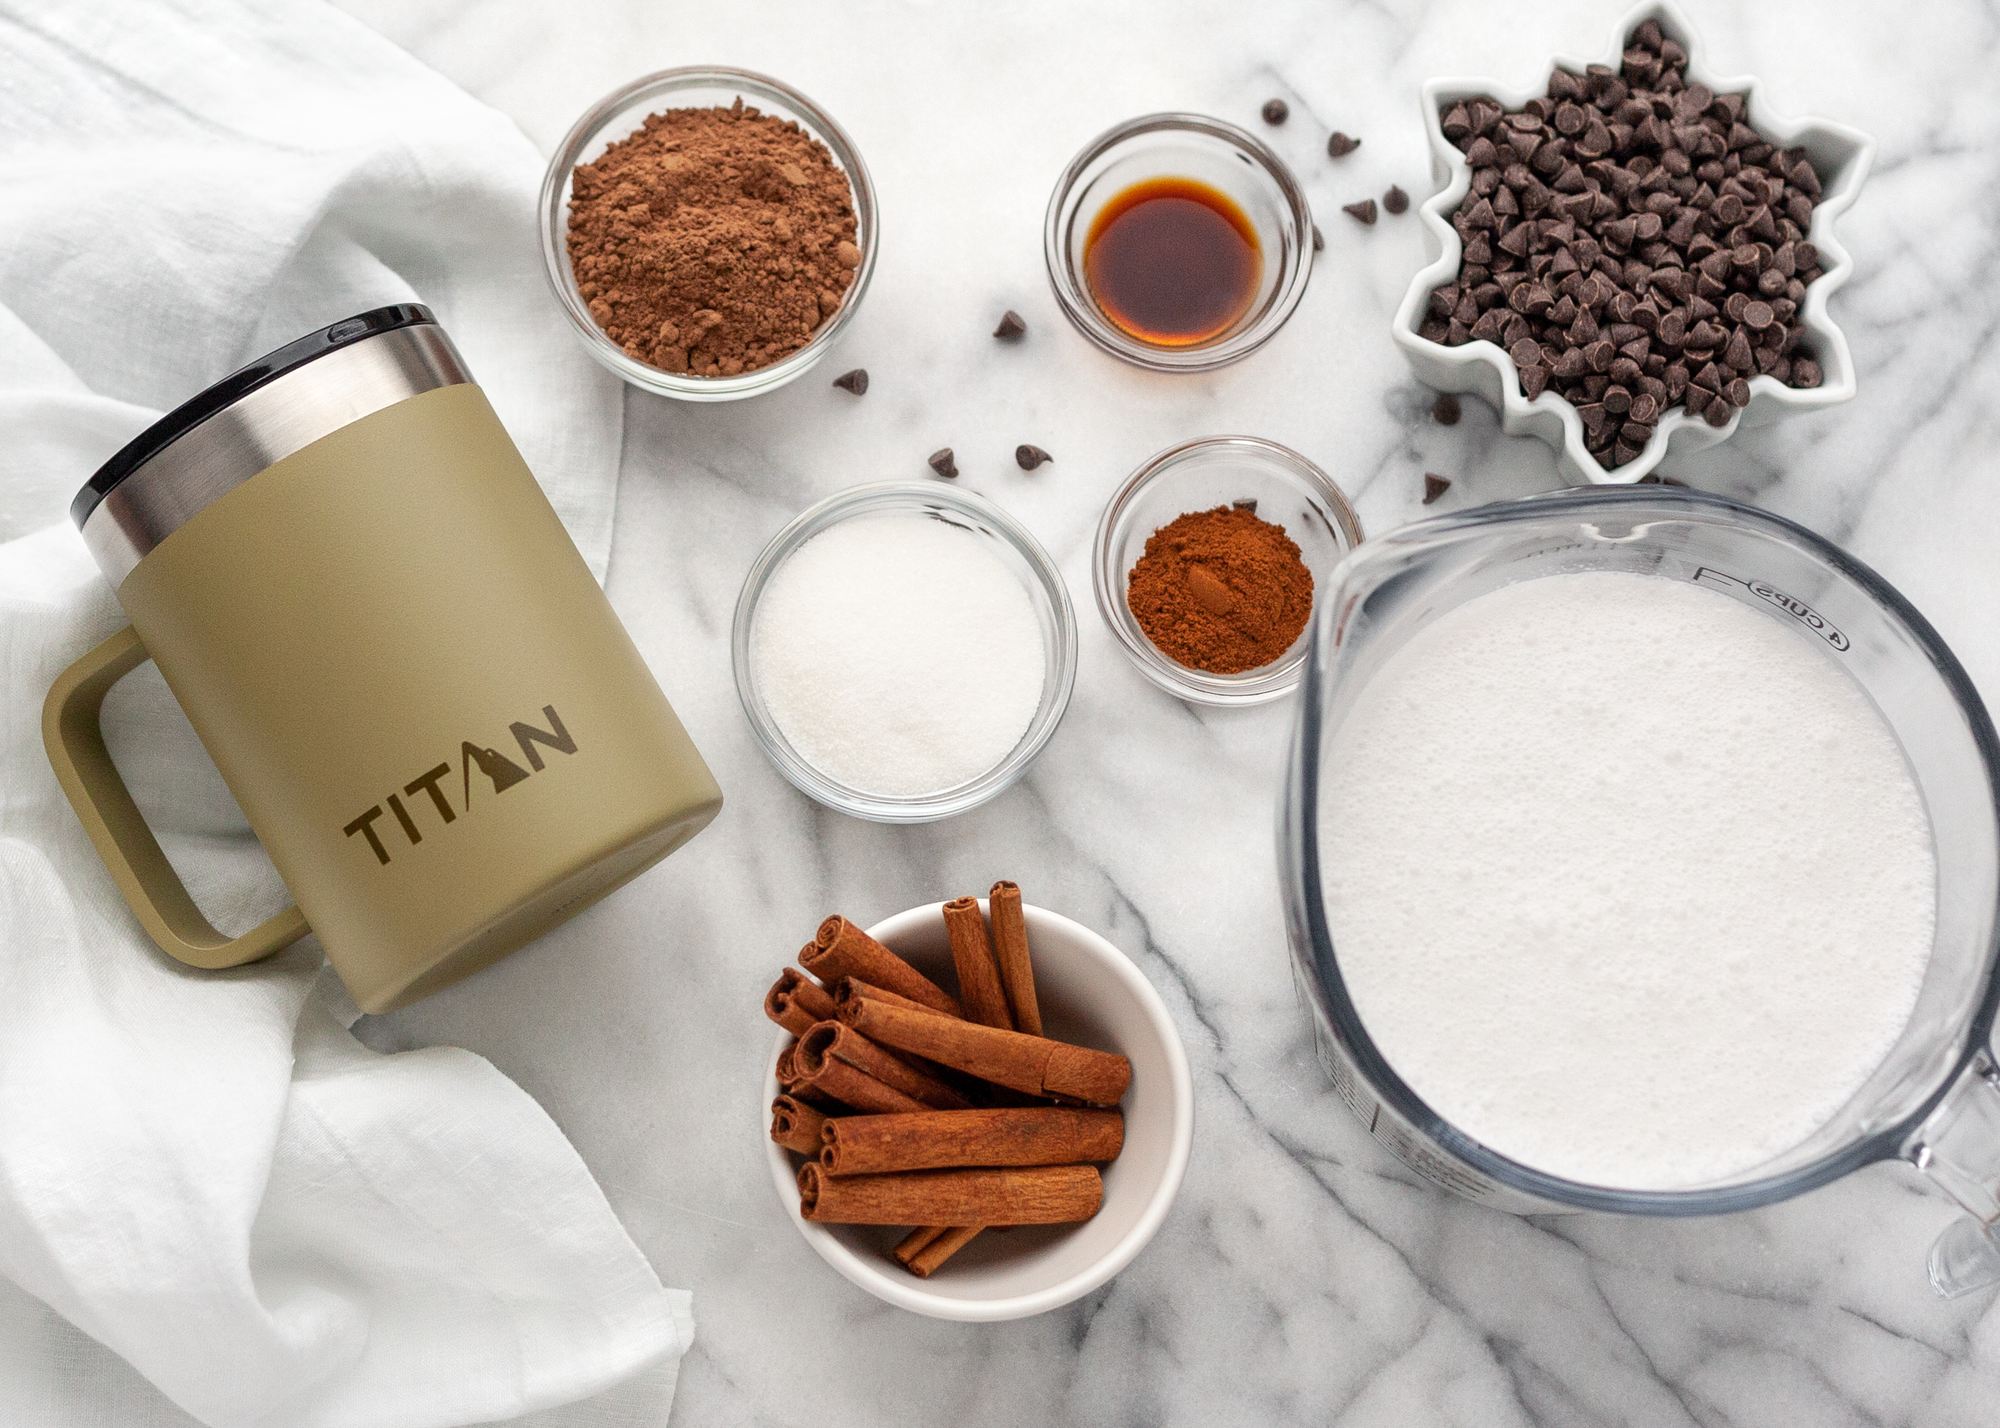 Ingredients to make homemade hot chocolate next to a stainless steel mug